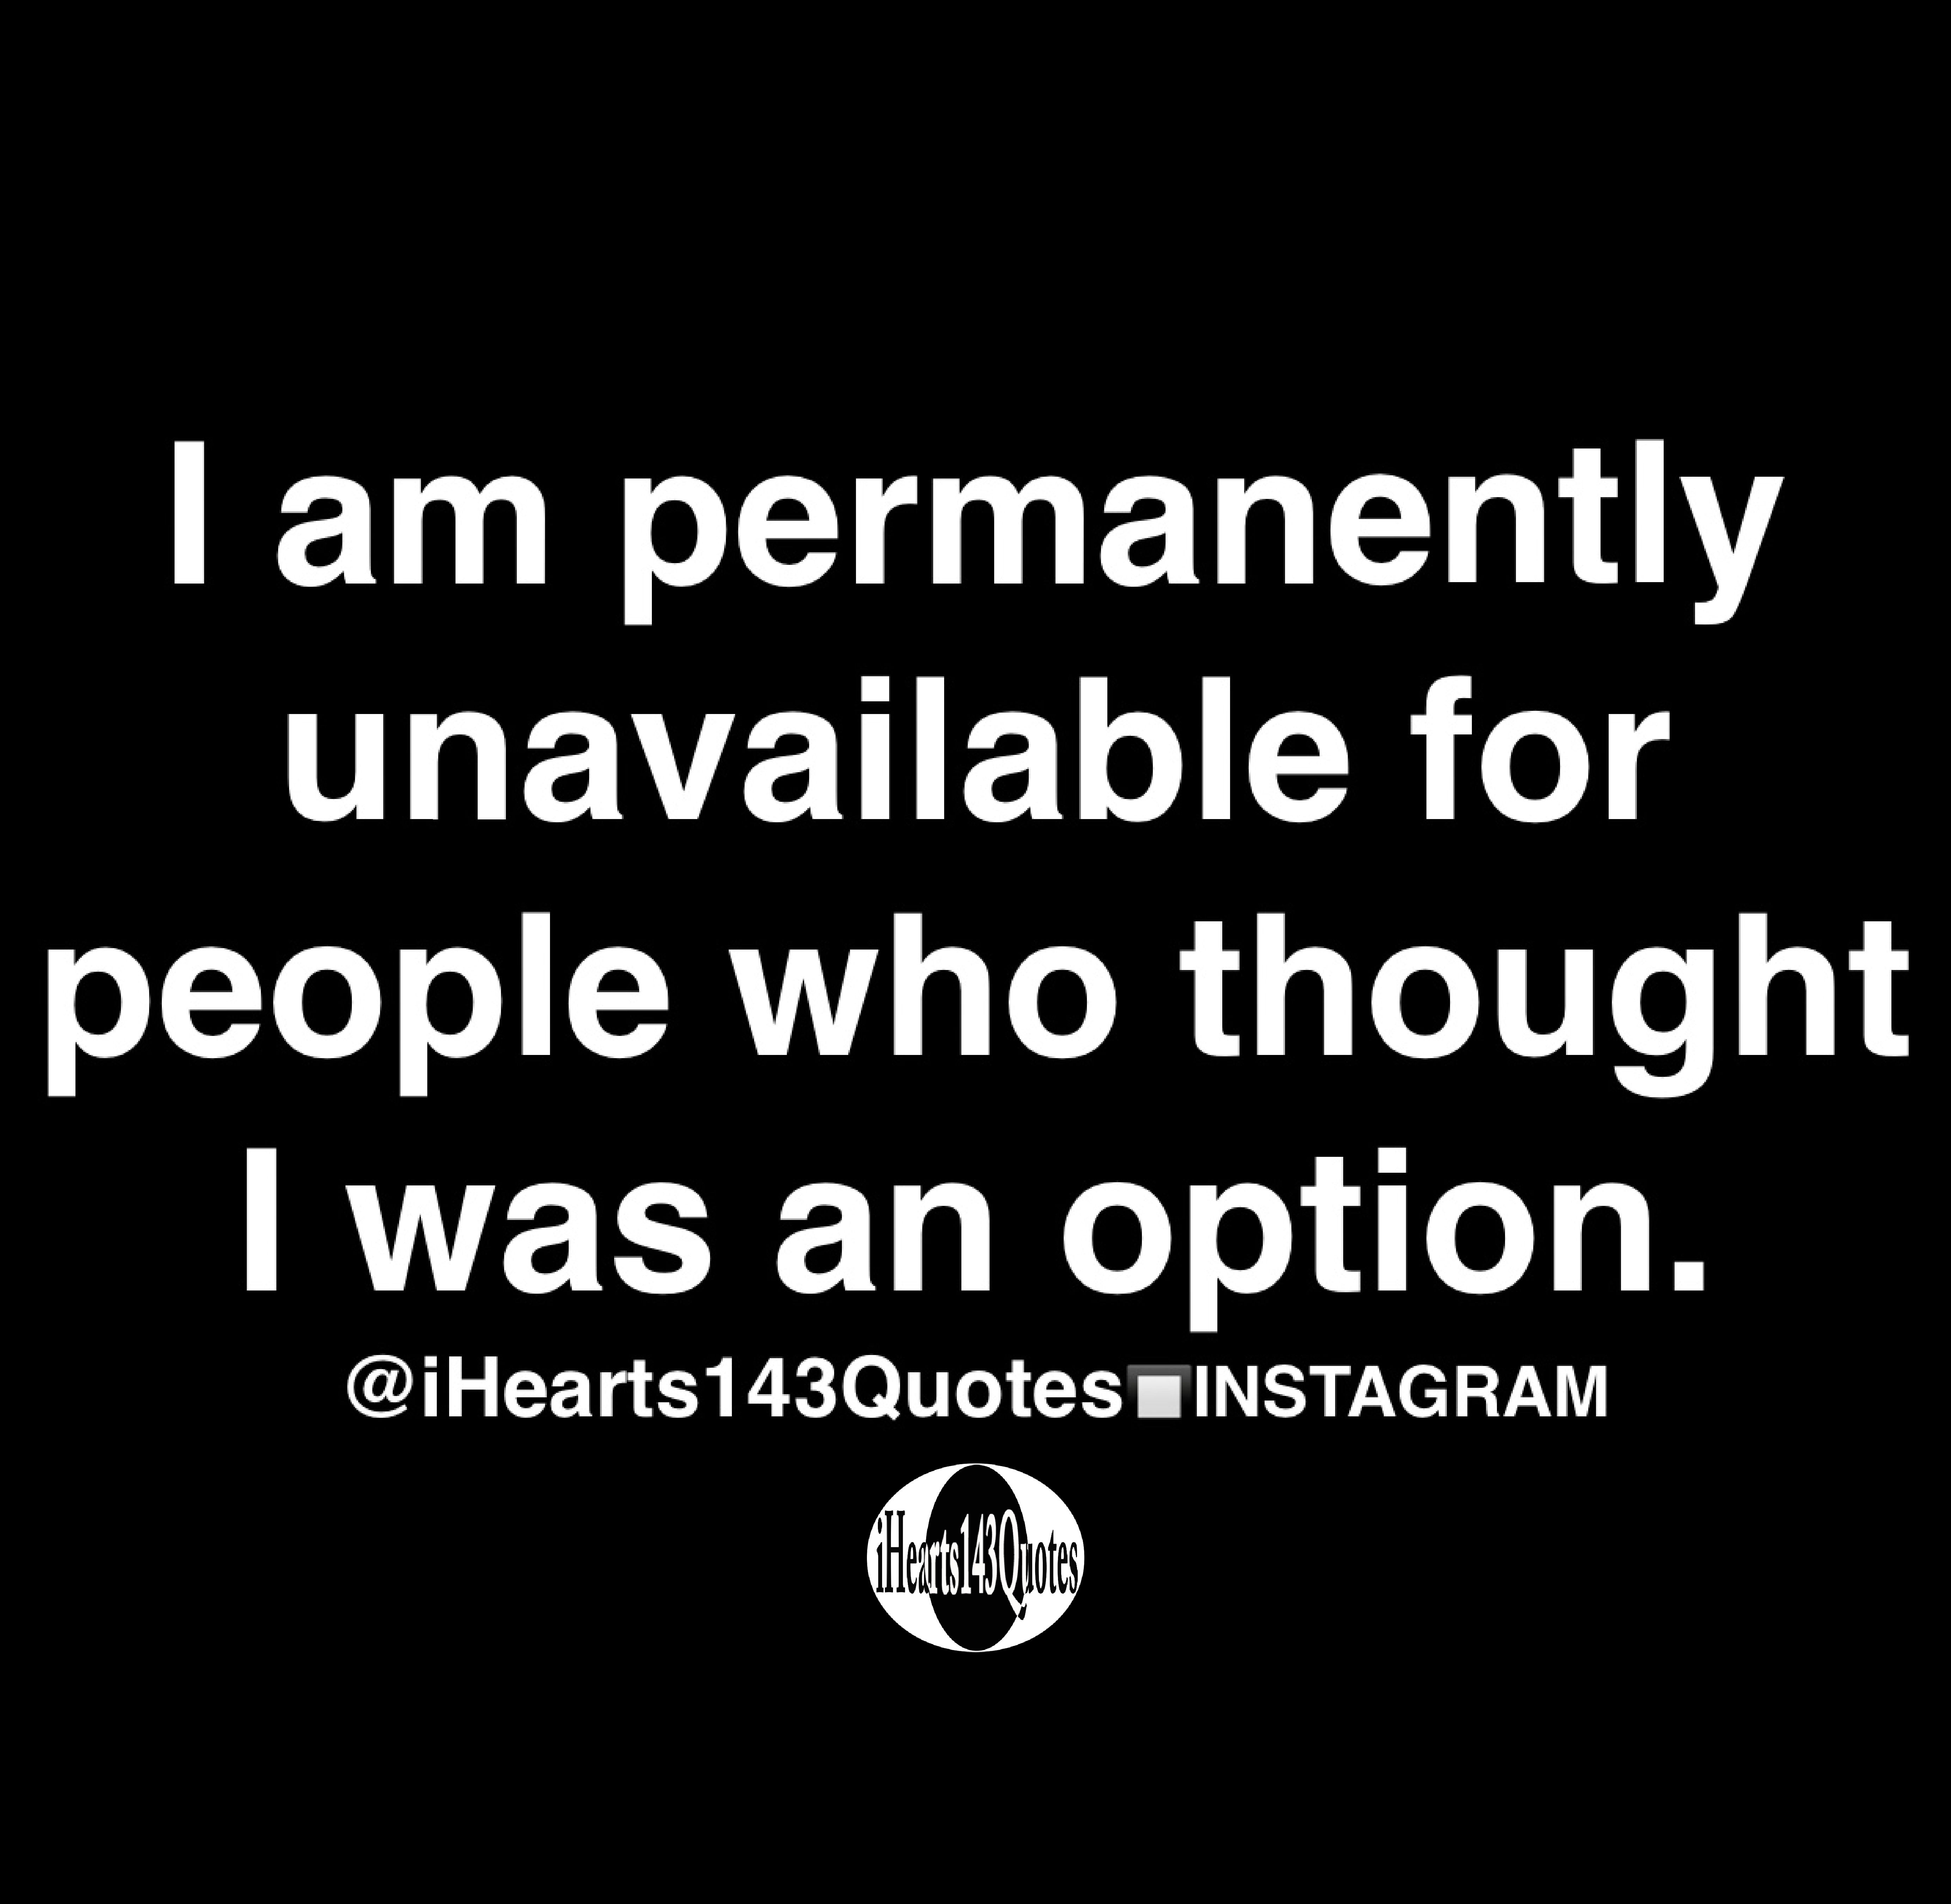 I am permanently unavailable for people who thought I was an option ...